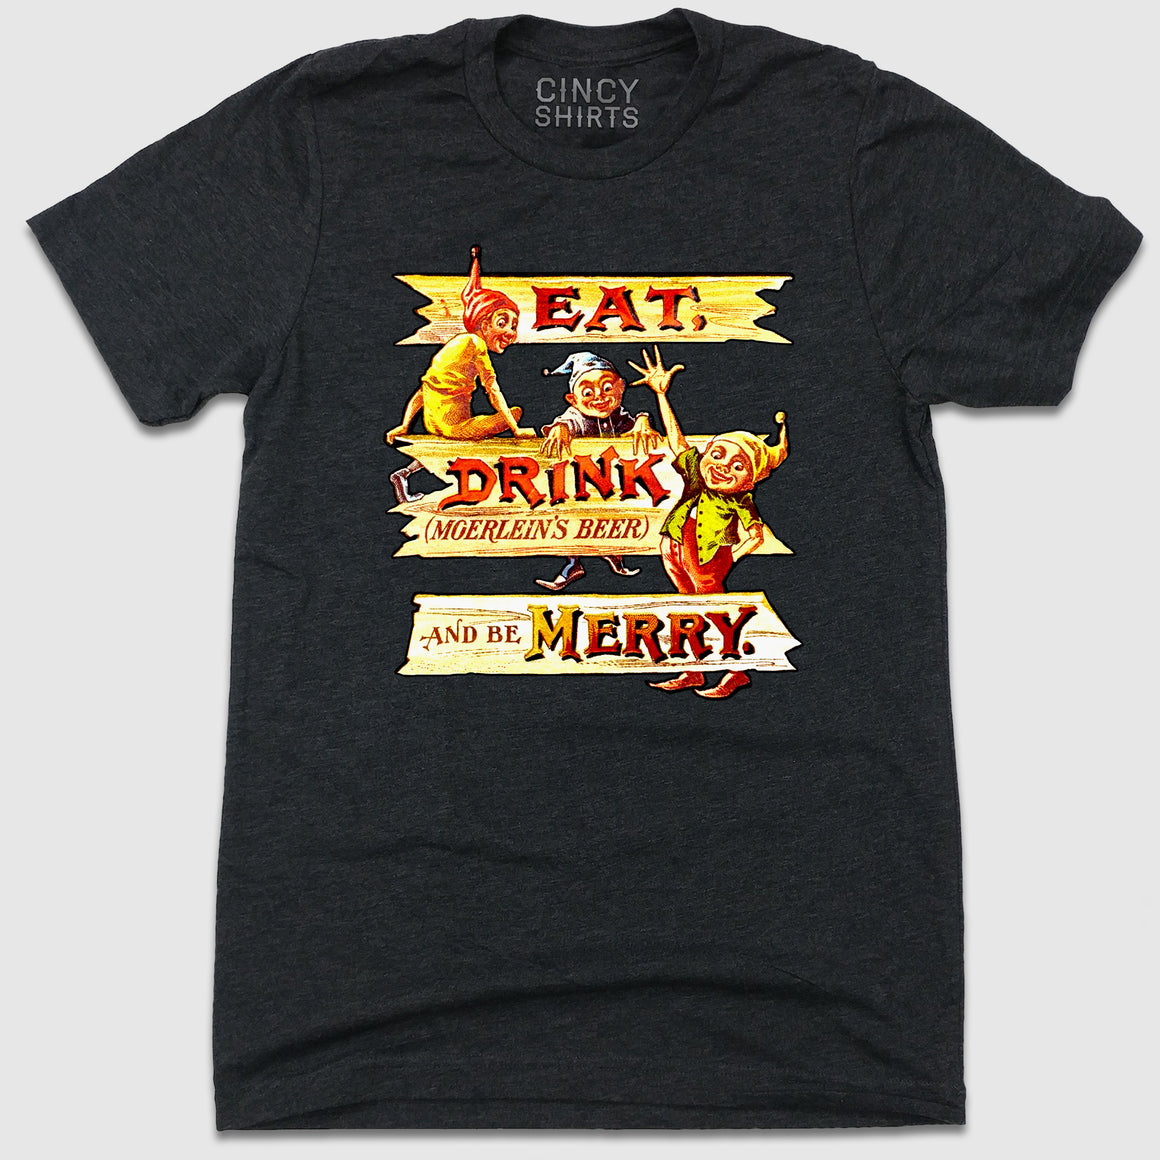 Eat Drink Moerlein and Be Merry - Cincy Shirts